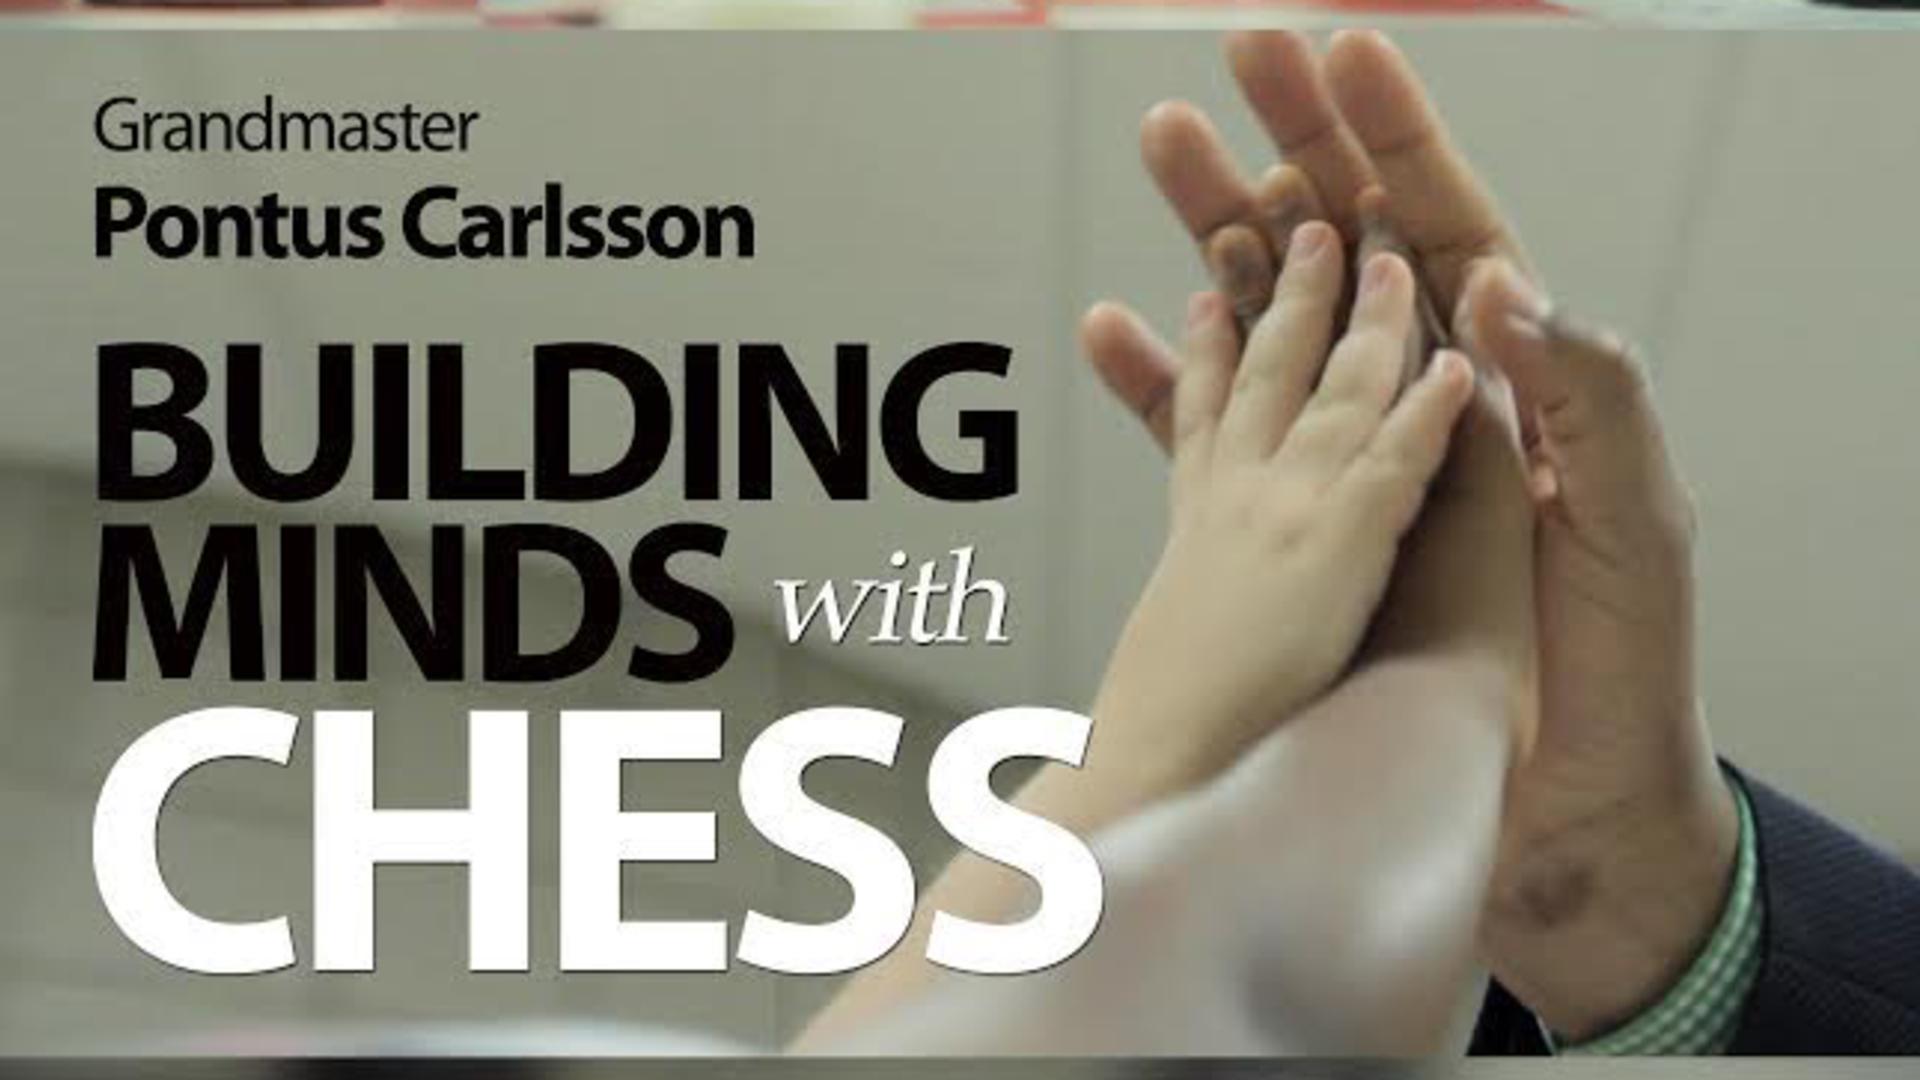 Building Minds with Chess  - Buy Now